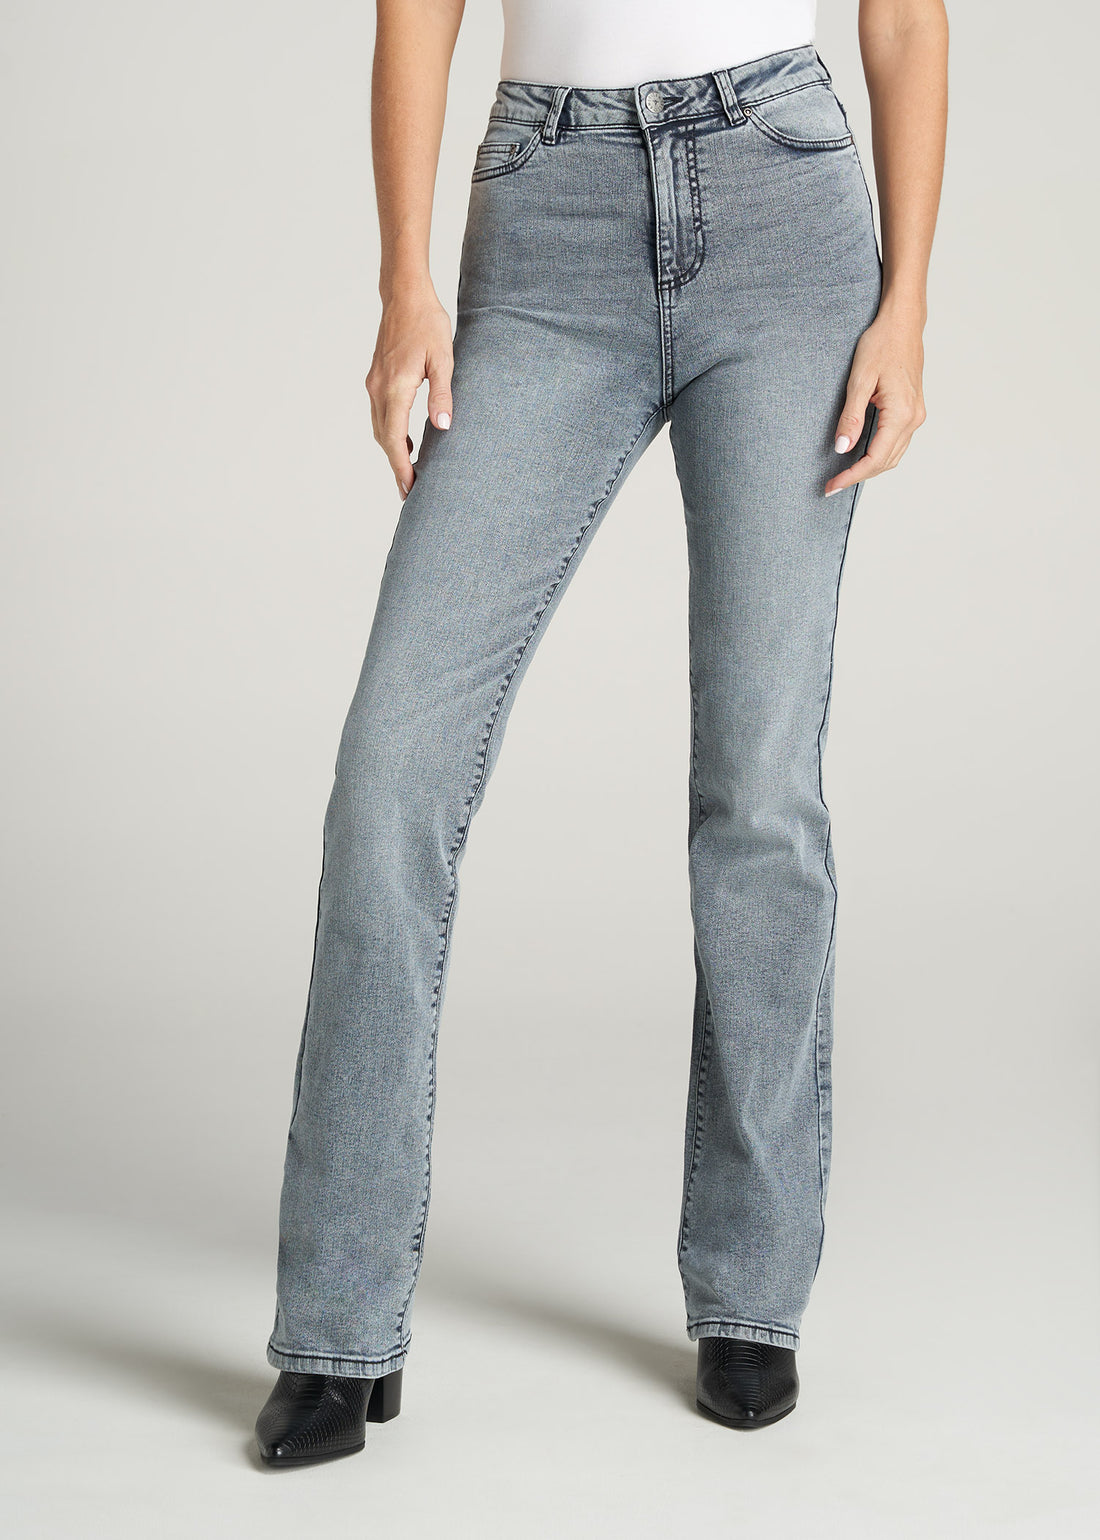 American Tall Britney Boot Cut Jeans for Tall Women in Light Grey